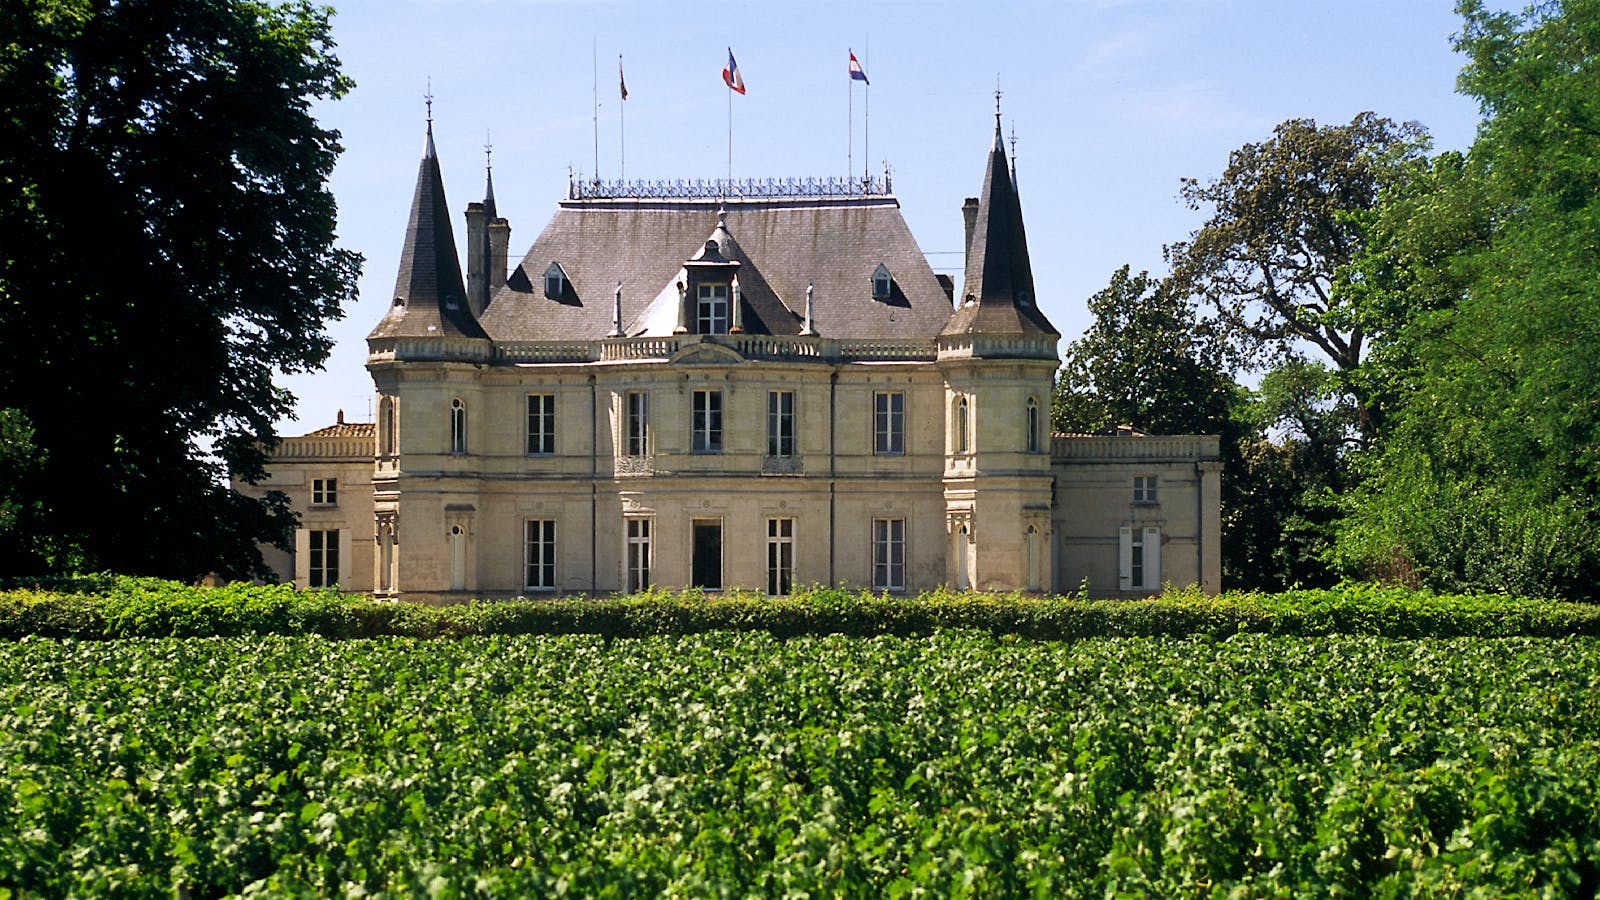 2017 Futures Preview: Do American Consumers Want Bordeaux’s Latest Vintage Yet?